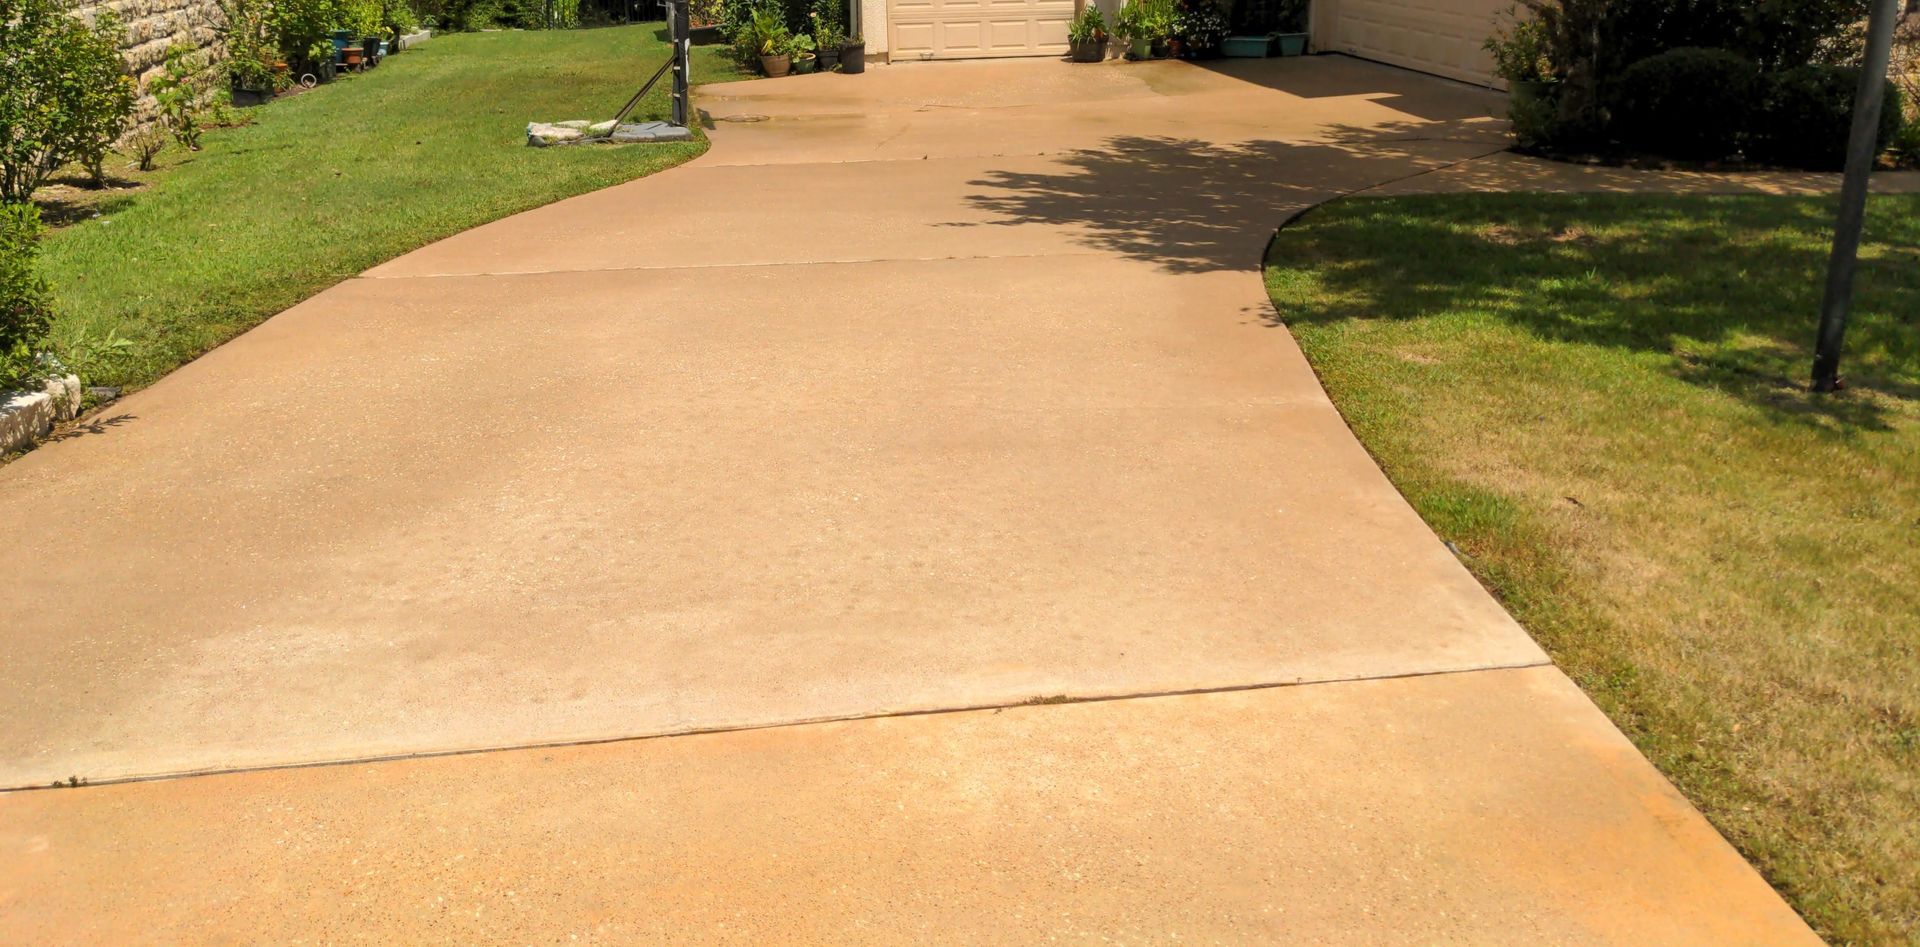 A concrete driveway leading to a house with grass on the side.